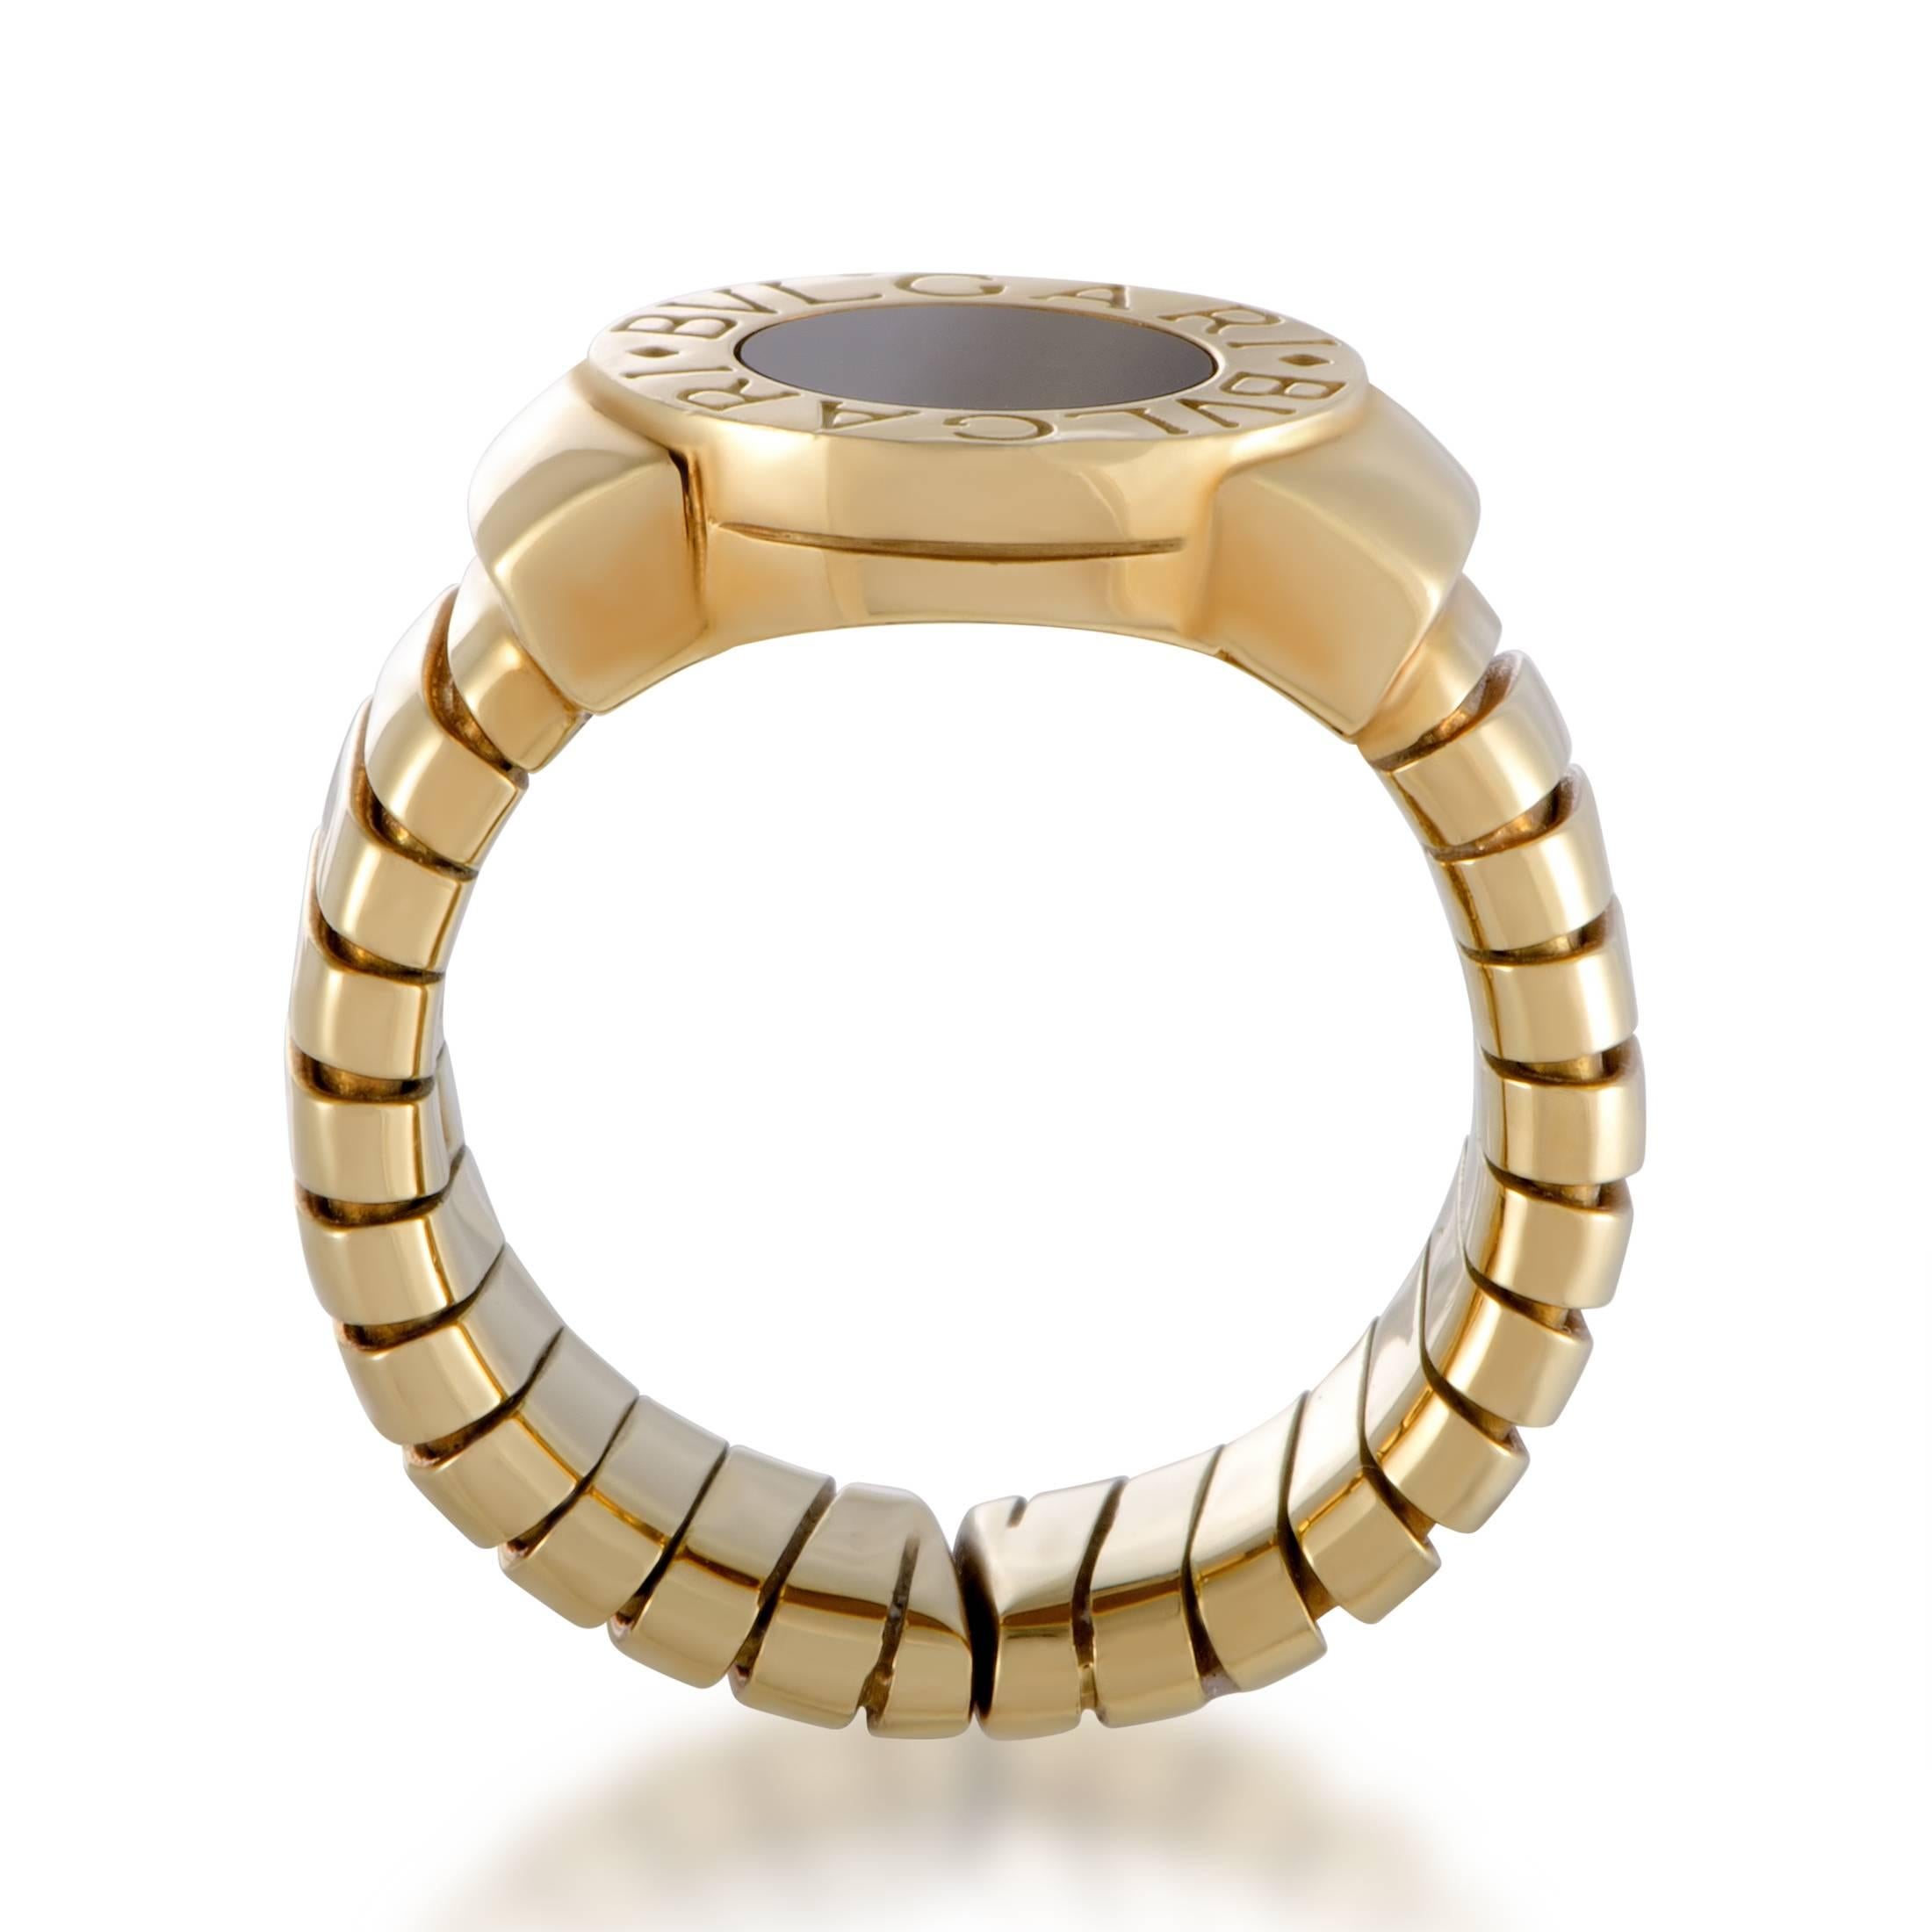 This sublime ring is an embodiment of prestige and elegance with its classy minimalist design and understated gemstone décor. Presented by Bvlgari, the ring is splendidly crafted from 18K yellow gold and set with an eye-catching onyx. Ring Top